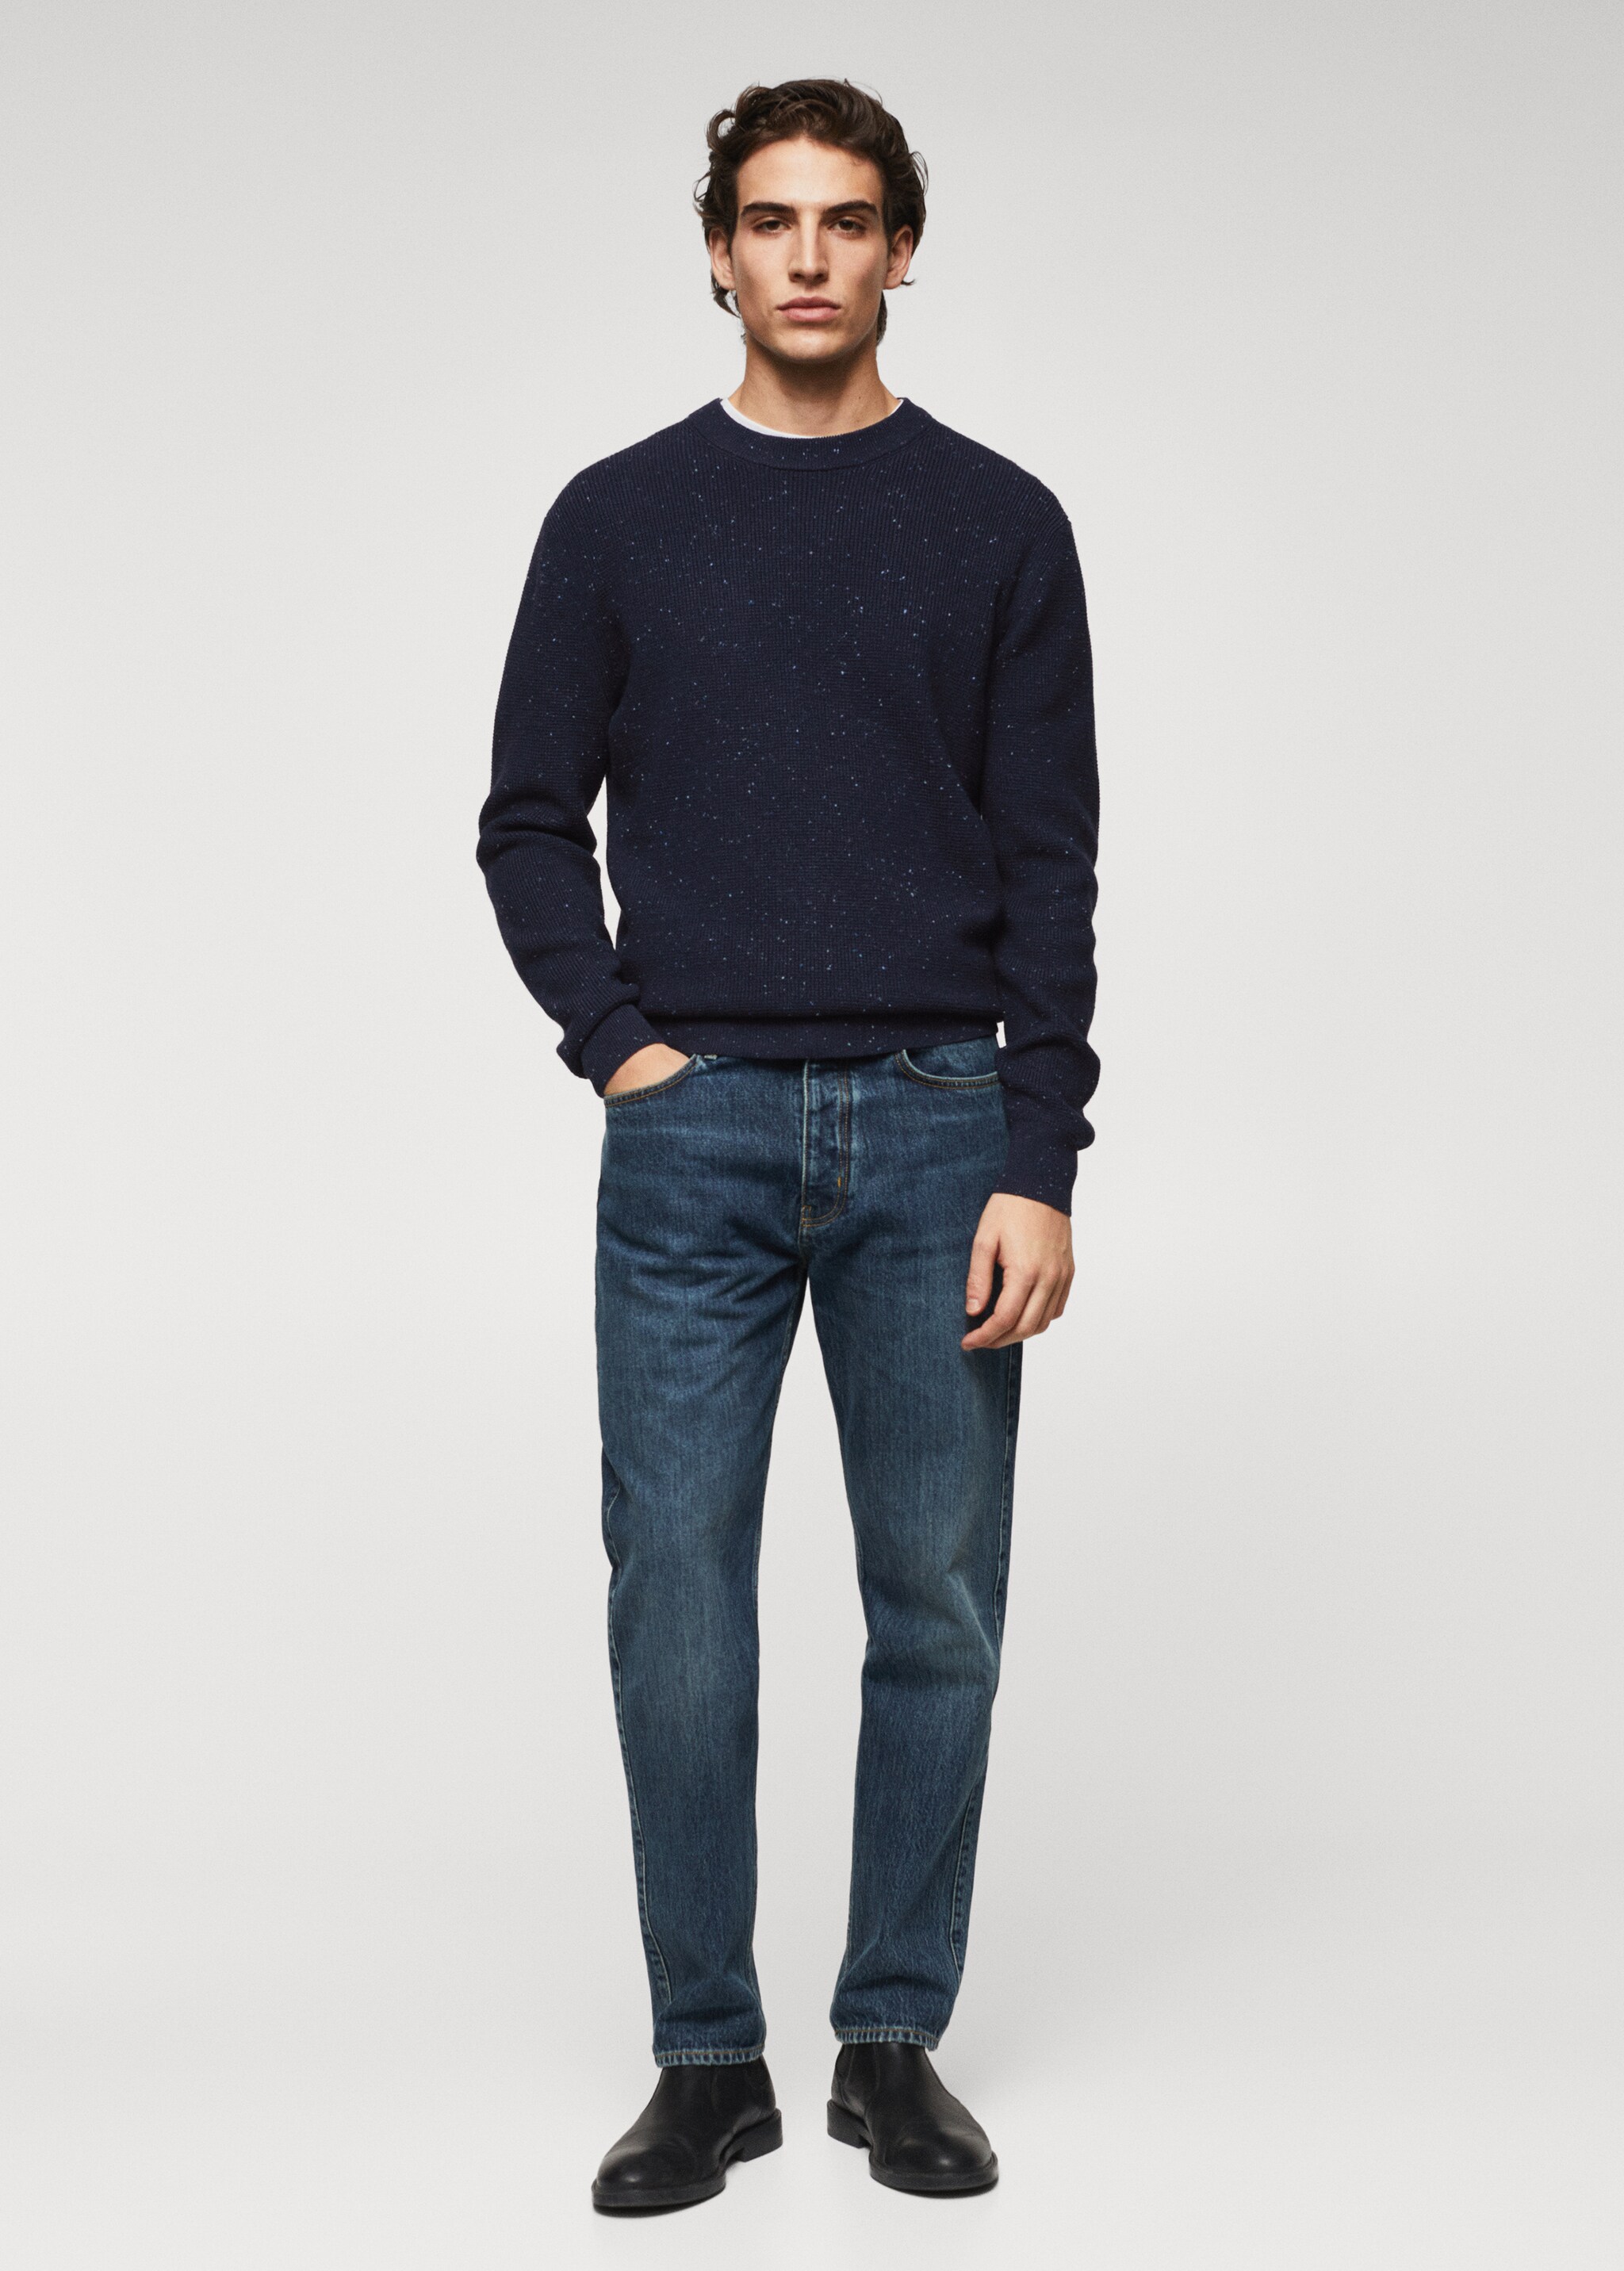 Structured flecked sweater - General plane